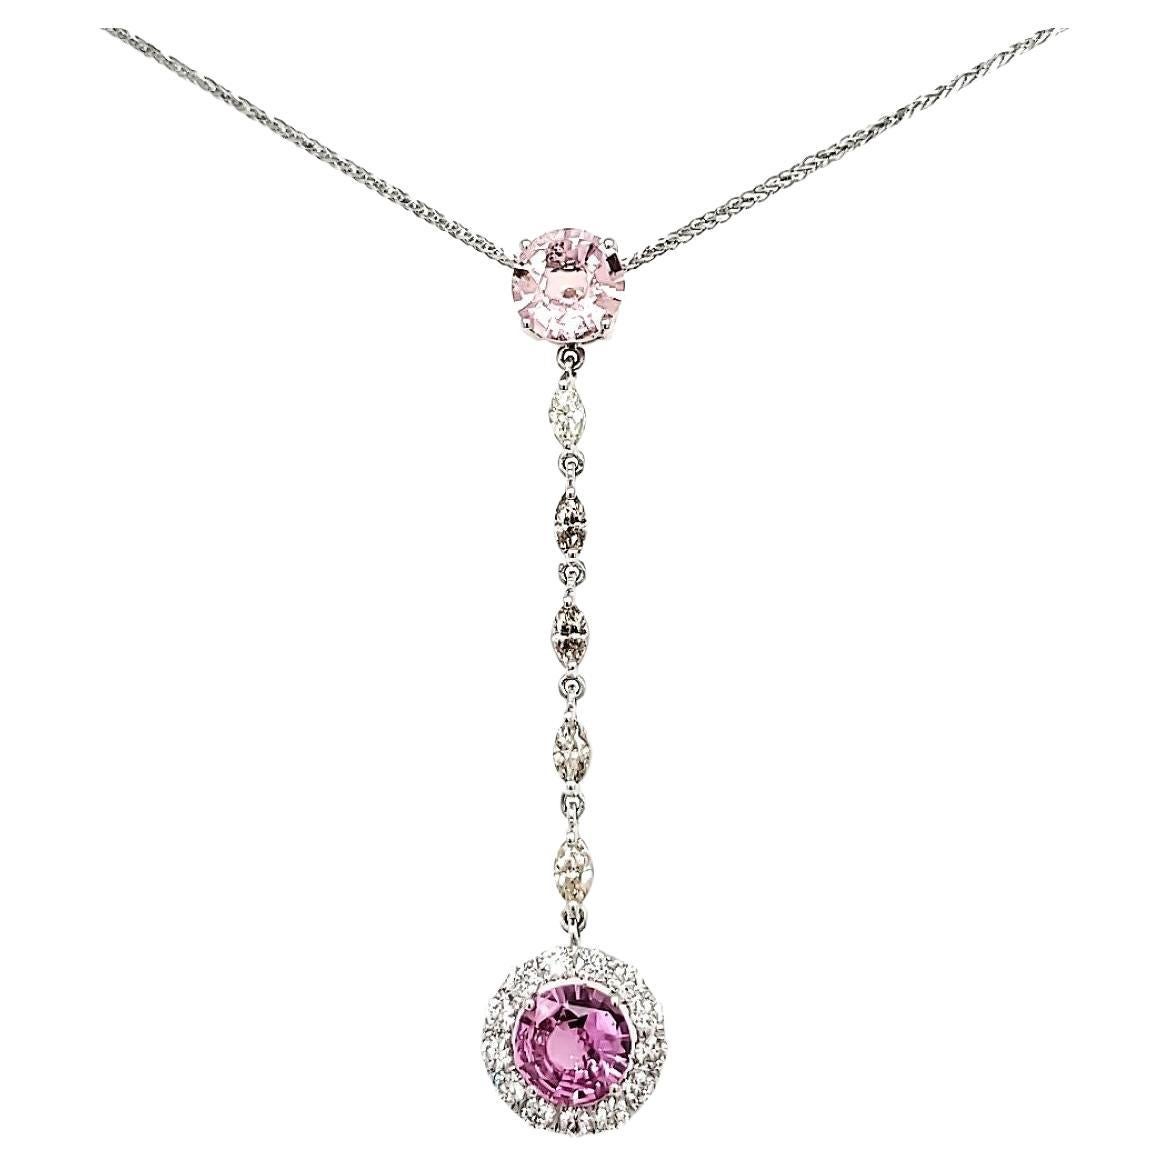 Pink Sapphire Cts 2.44 and Marquise Diamond Cts 0.42 Drop Pendant Necklace